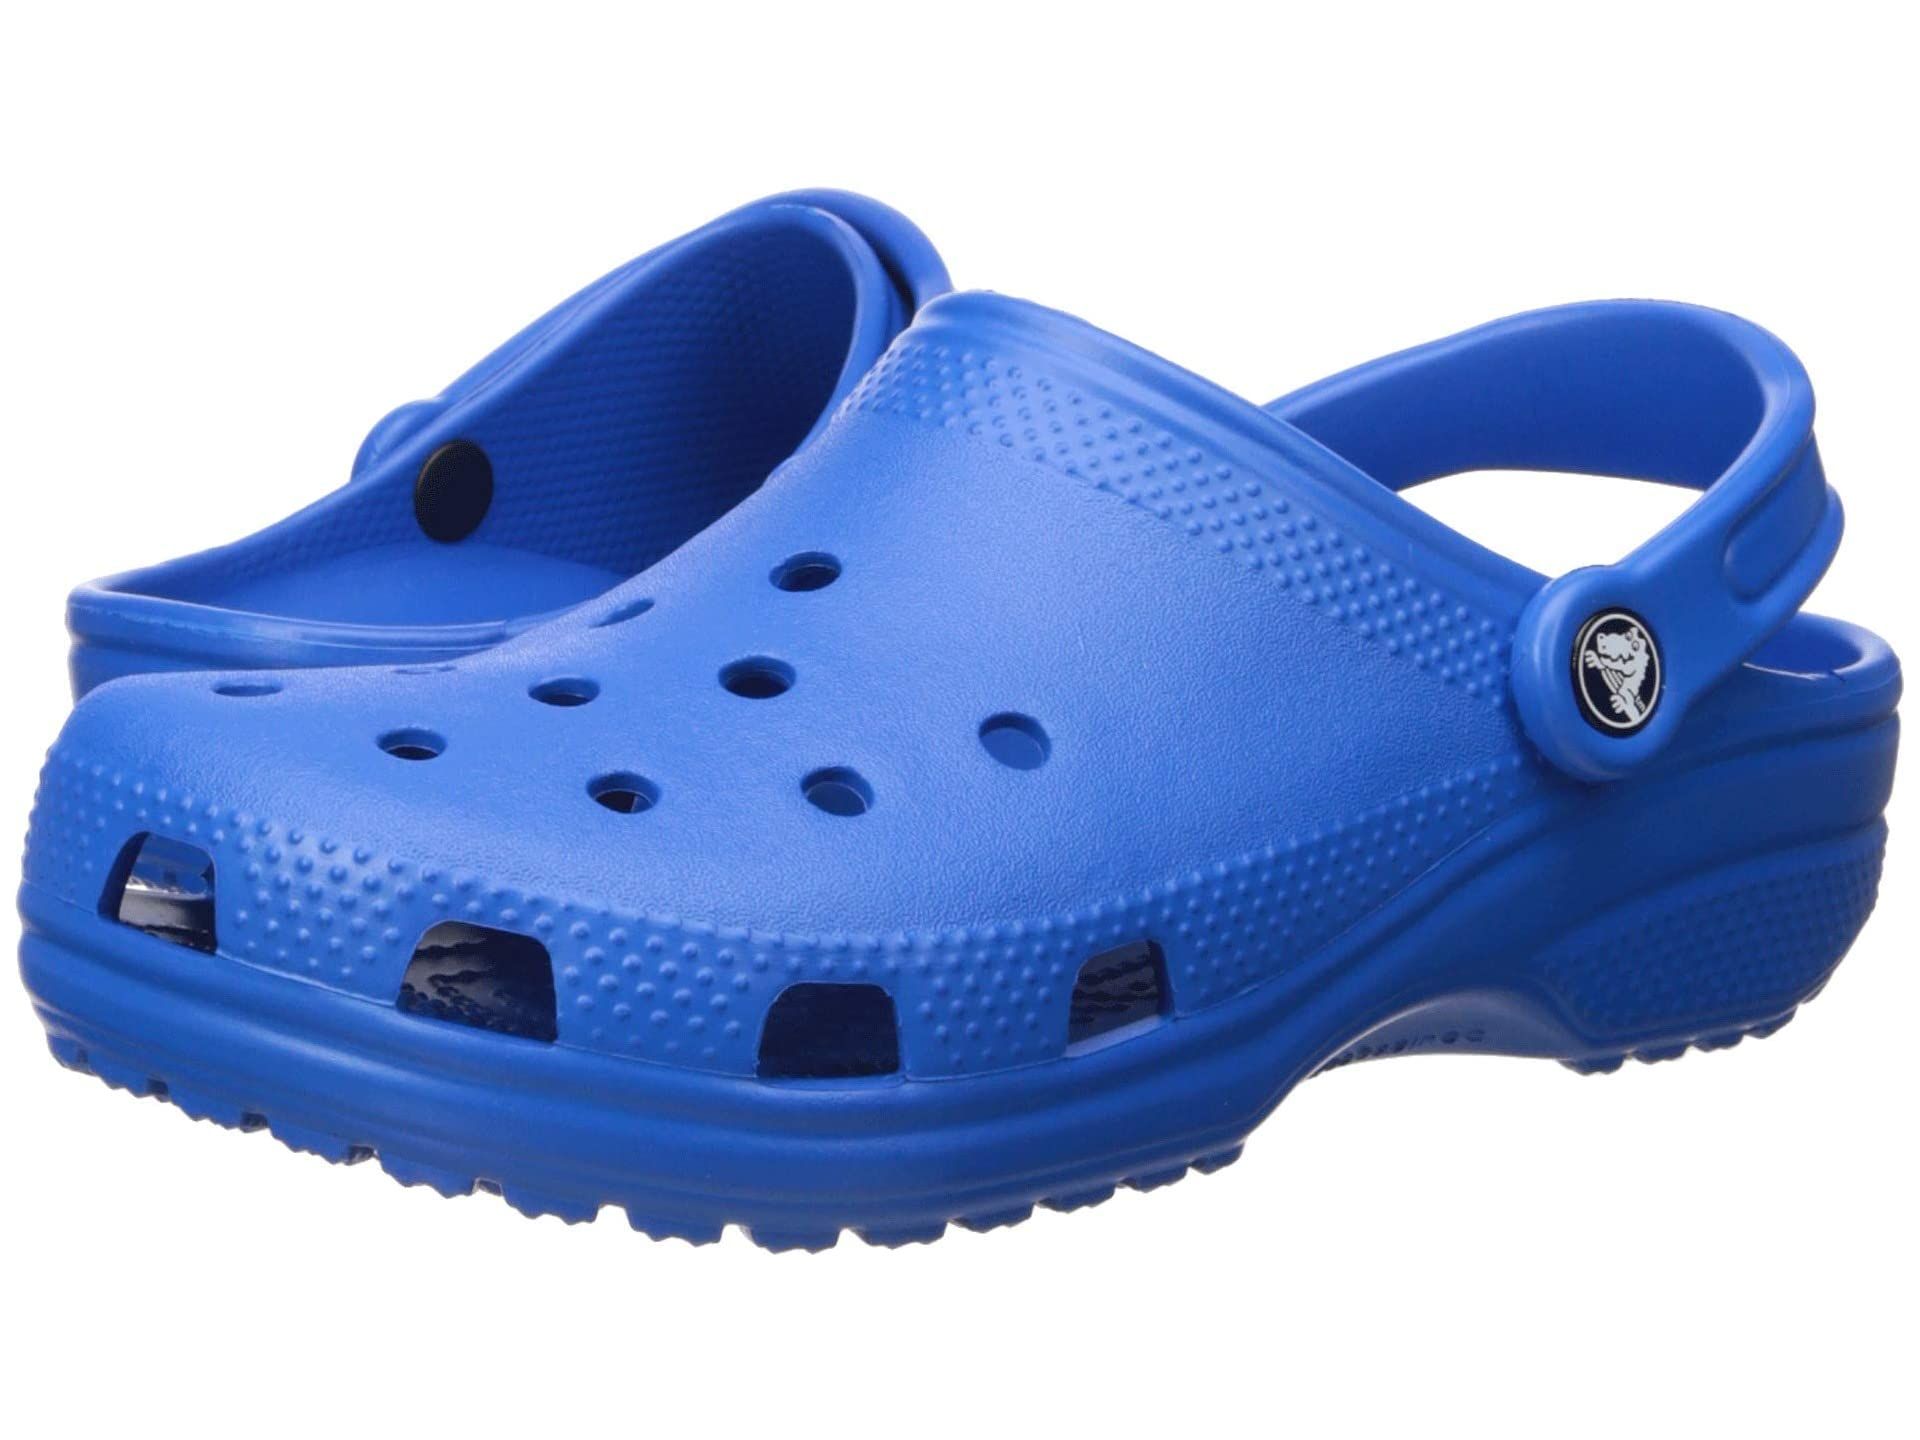 The Pros and Cons of Buying Crocs